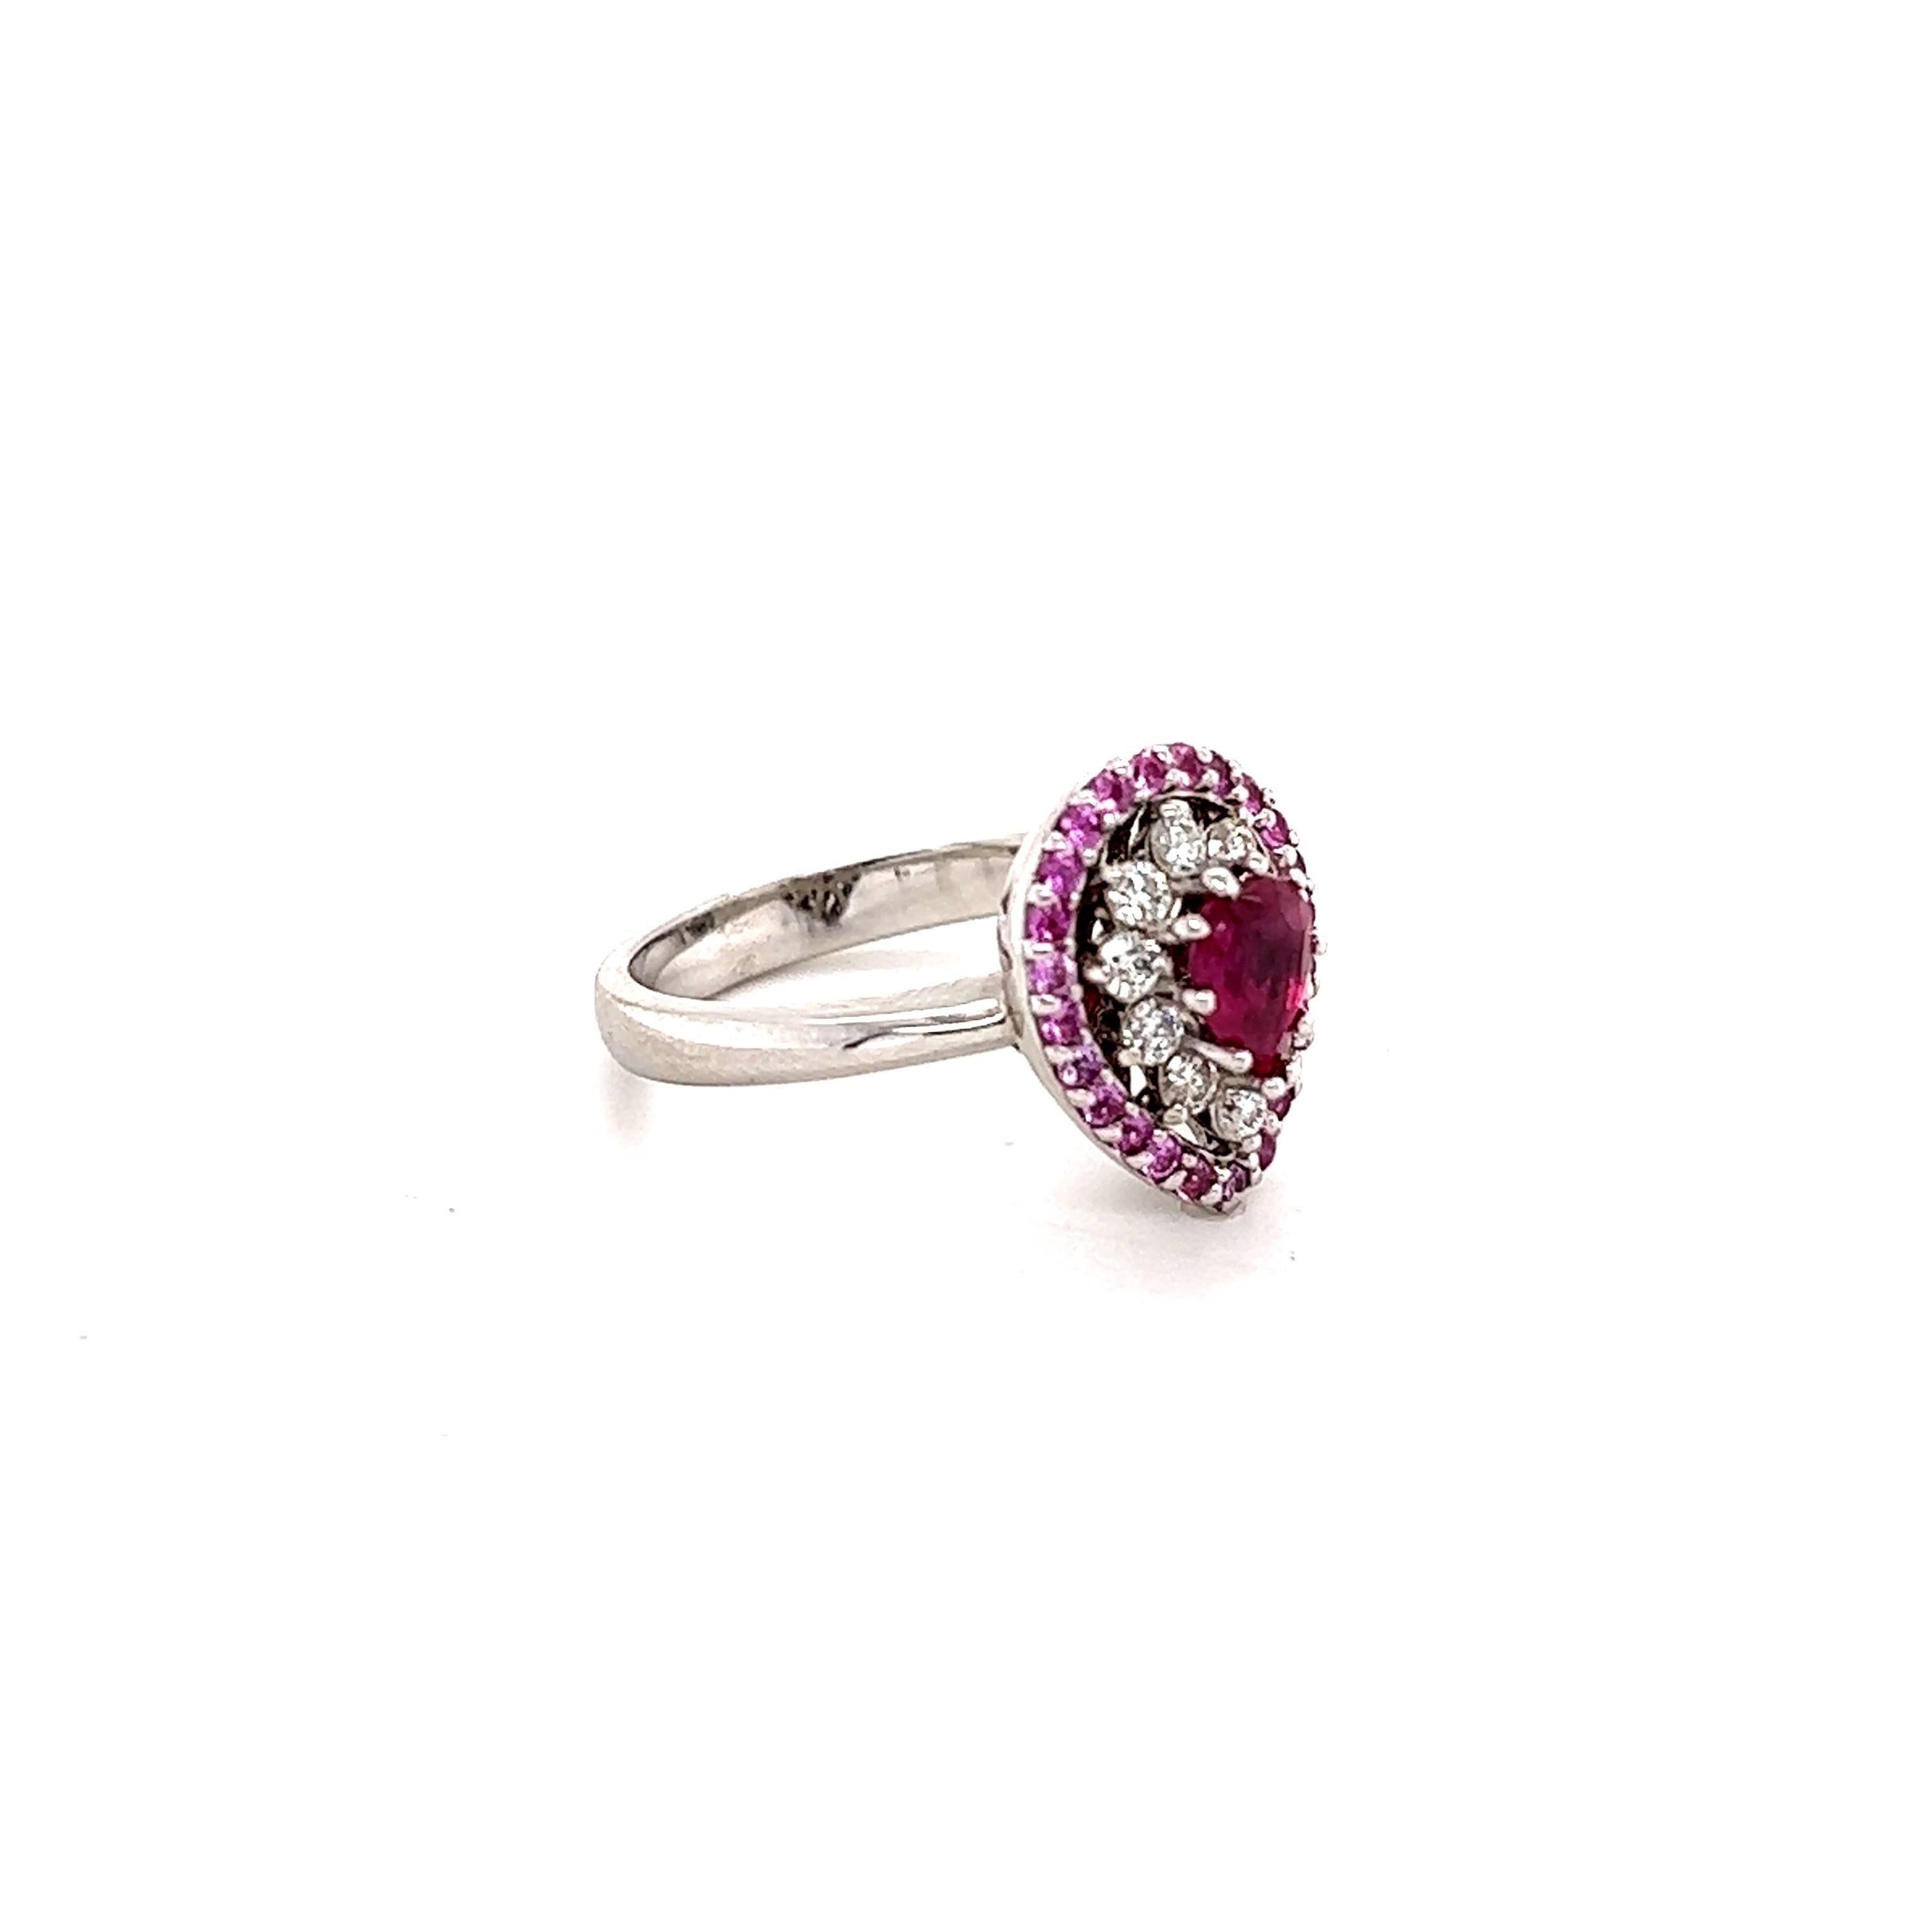 This ring has a Pear Cut Ruby that measures at approximately 6 mm x 4 mm. It also has 24 Round Cut Pink Sapphires that weigh 0.37 carats and there are 10 Round Cut Diamonds that weigh 0.28 carats. (Clarity: VS, Color: H) The total carat weight of